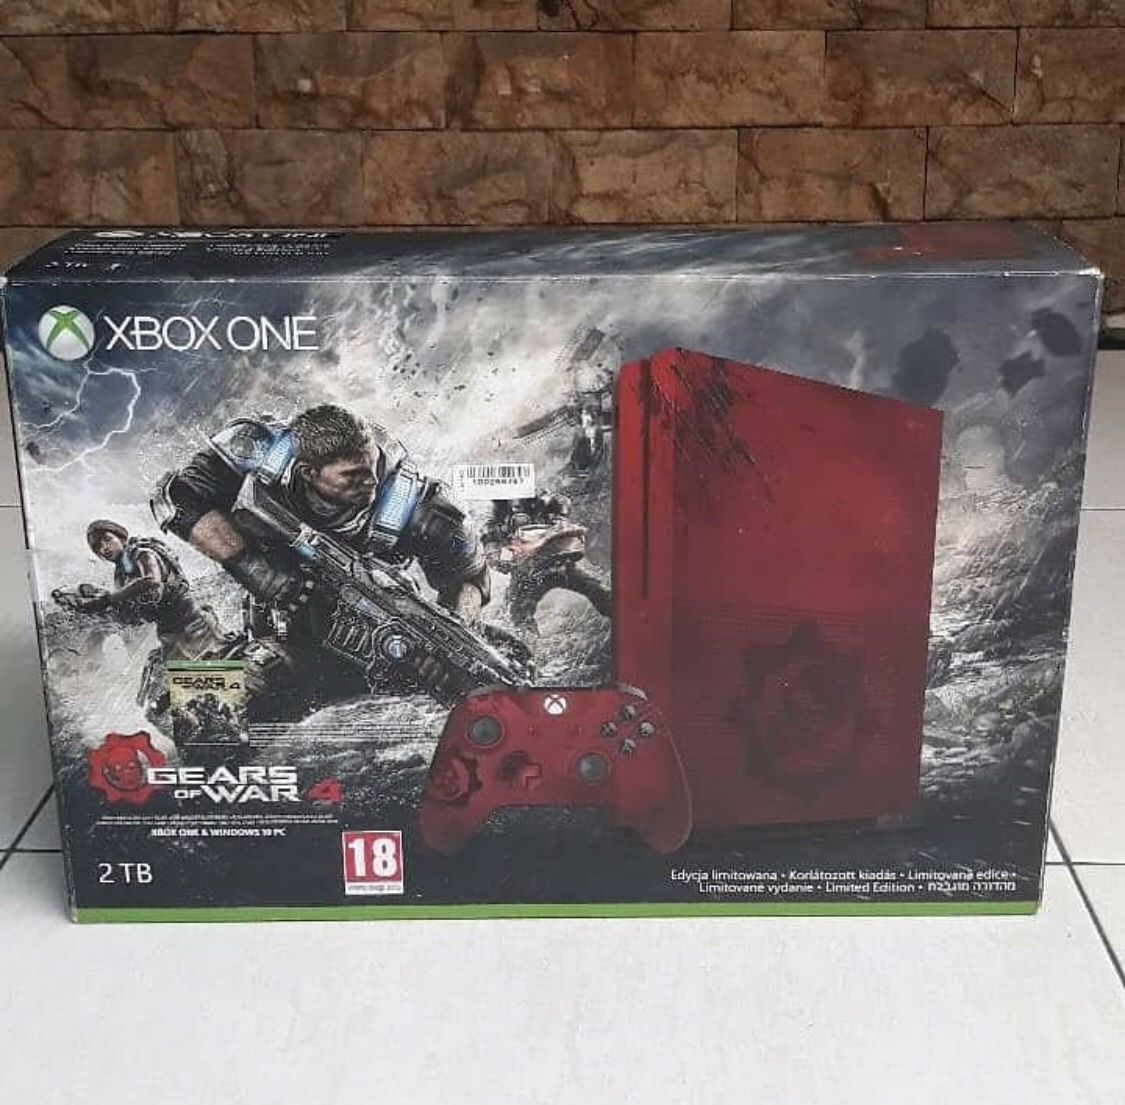 Xbox One Gears of War limited addition